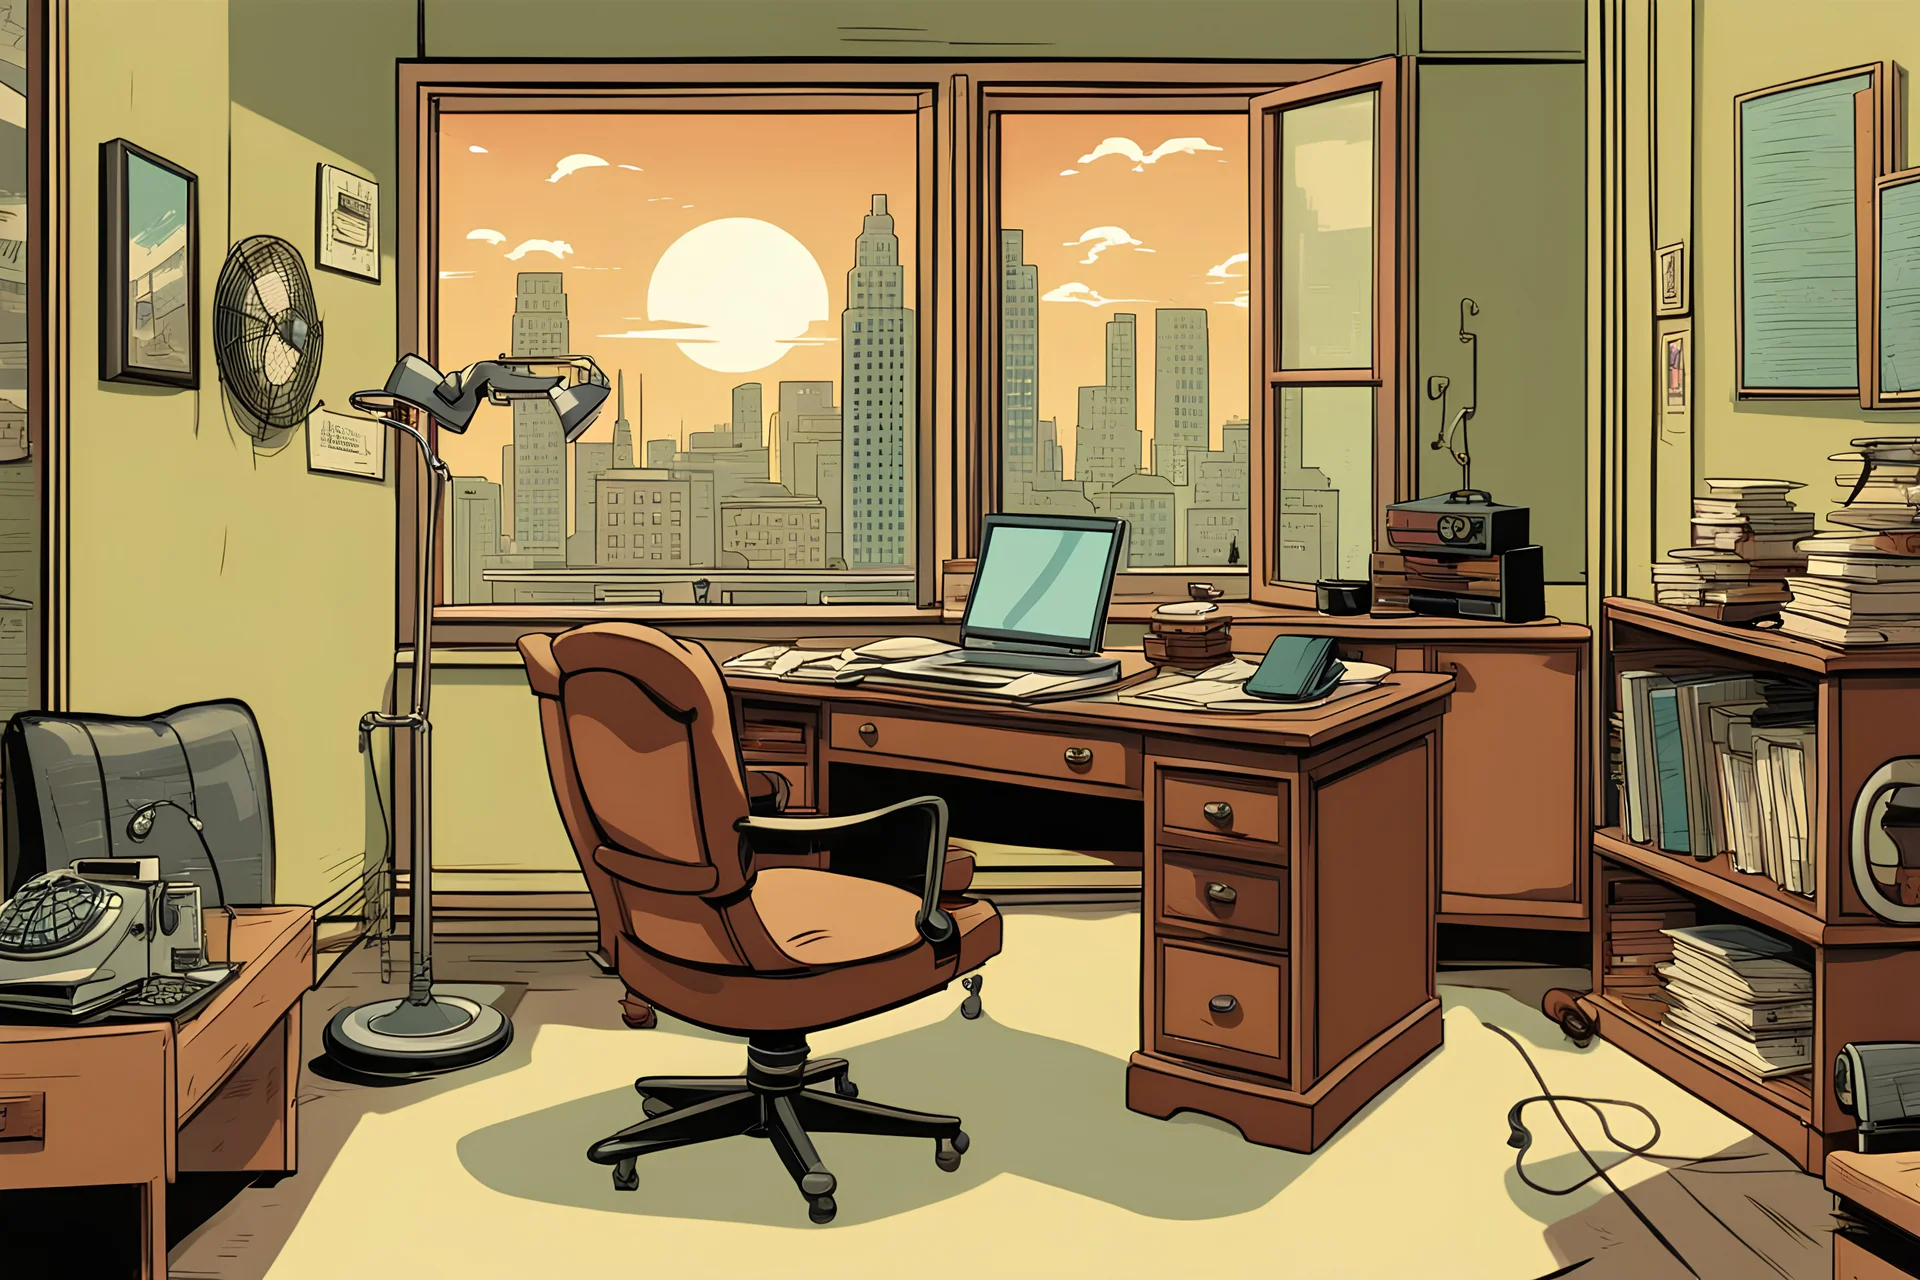 private eye office, desk and chair, window with city view, retro cartoon, old colors, books, fan and phone on desk, 50's